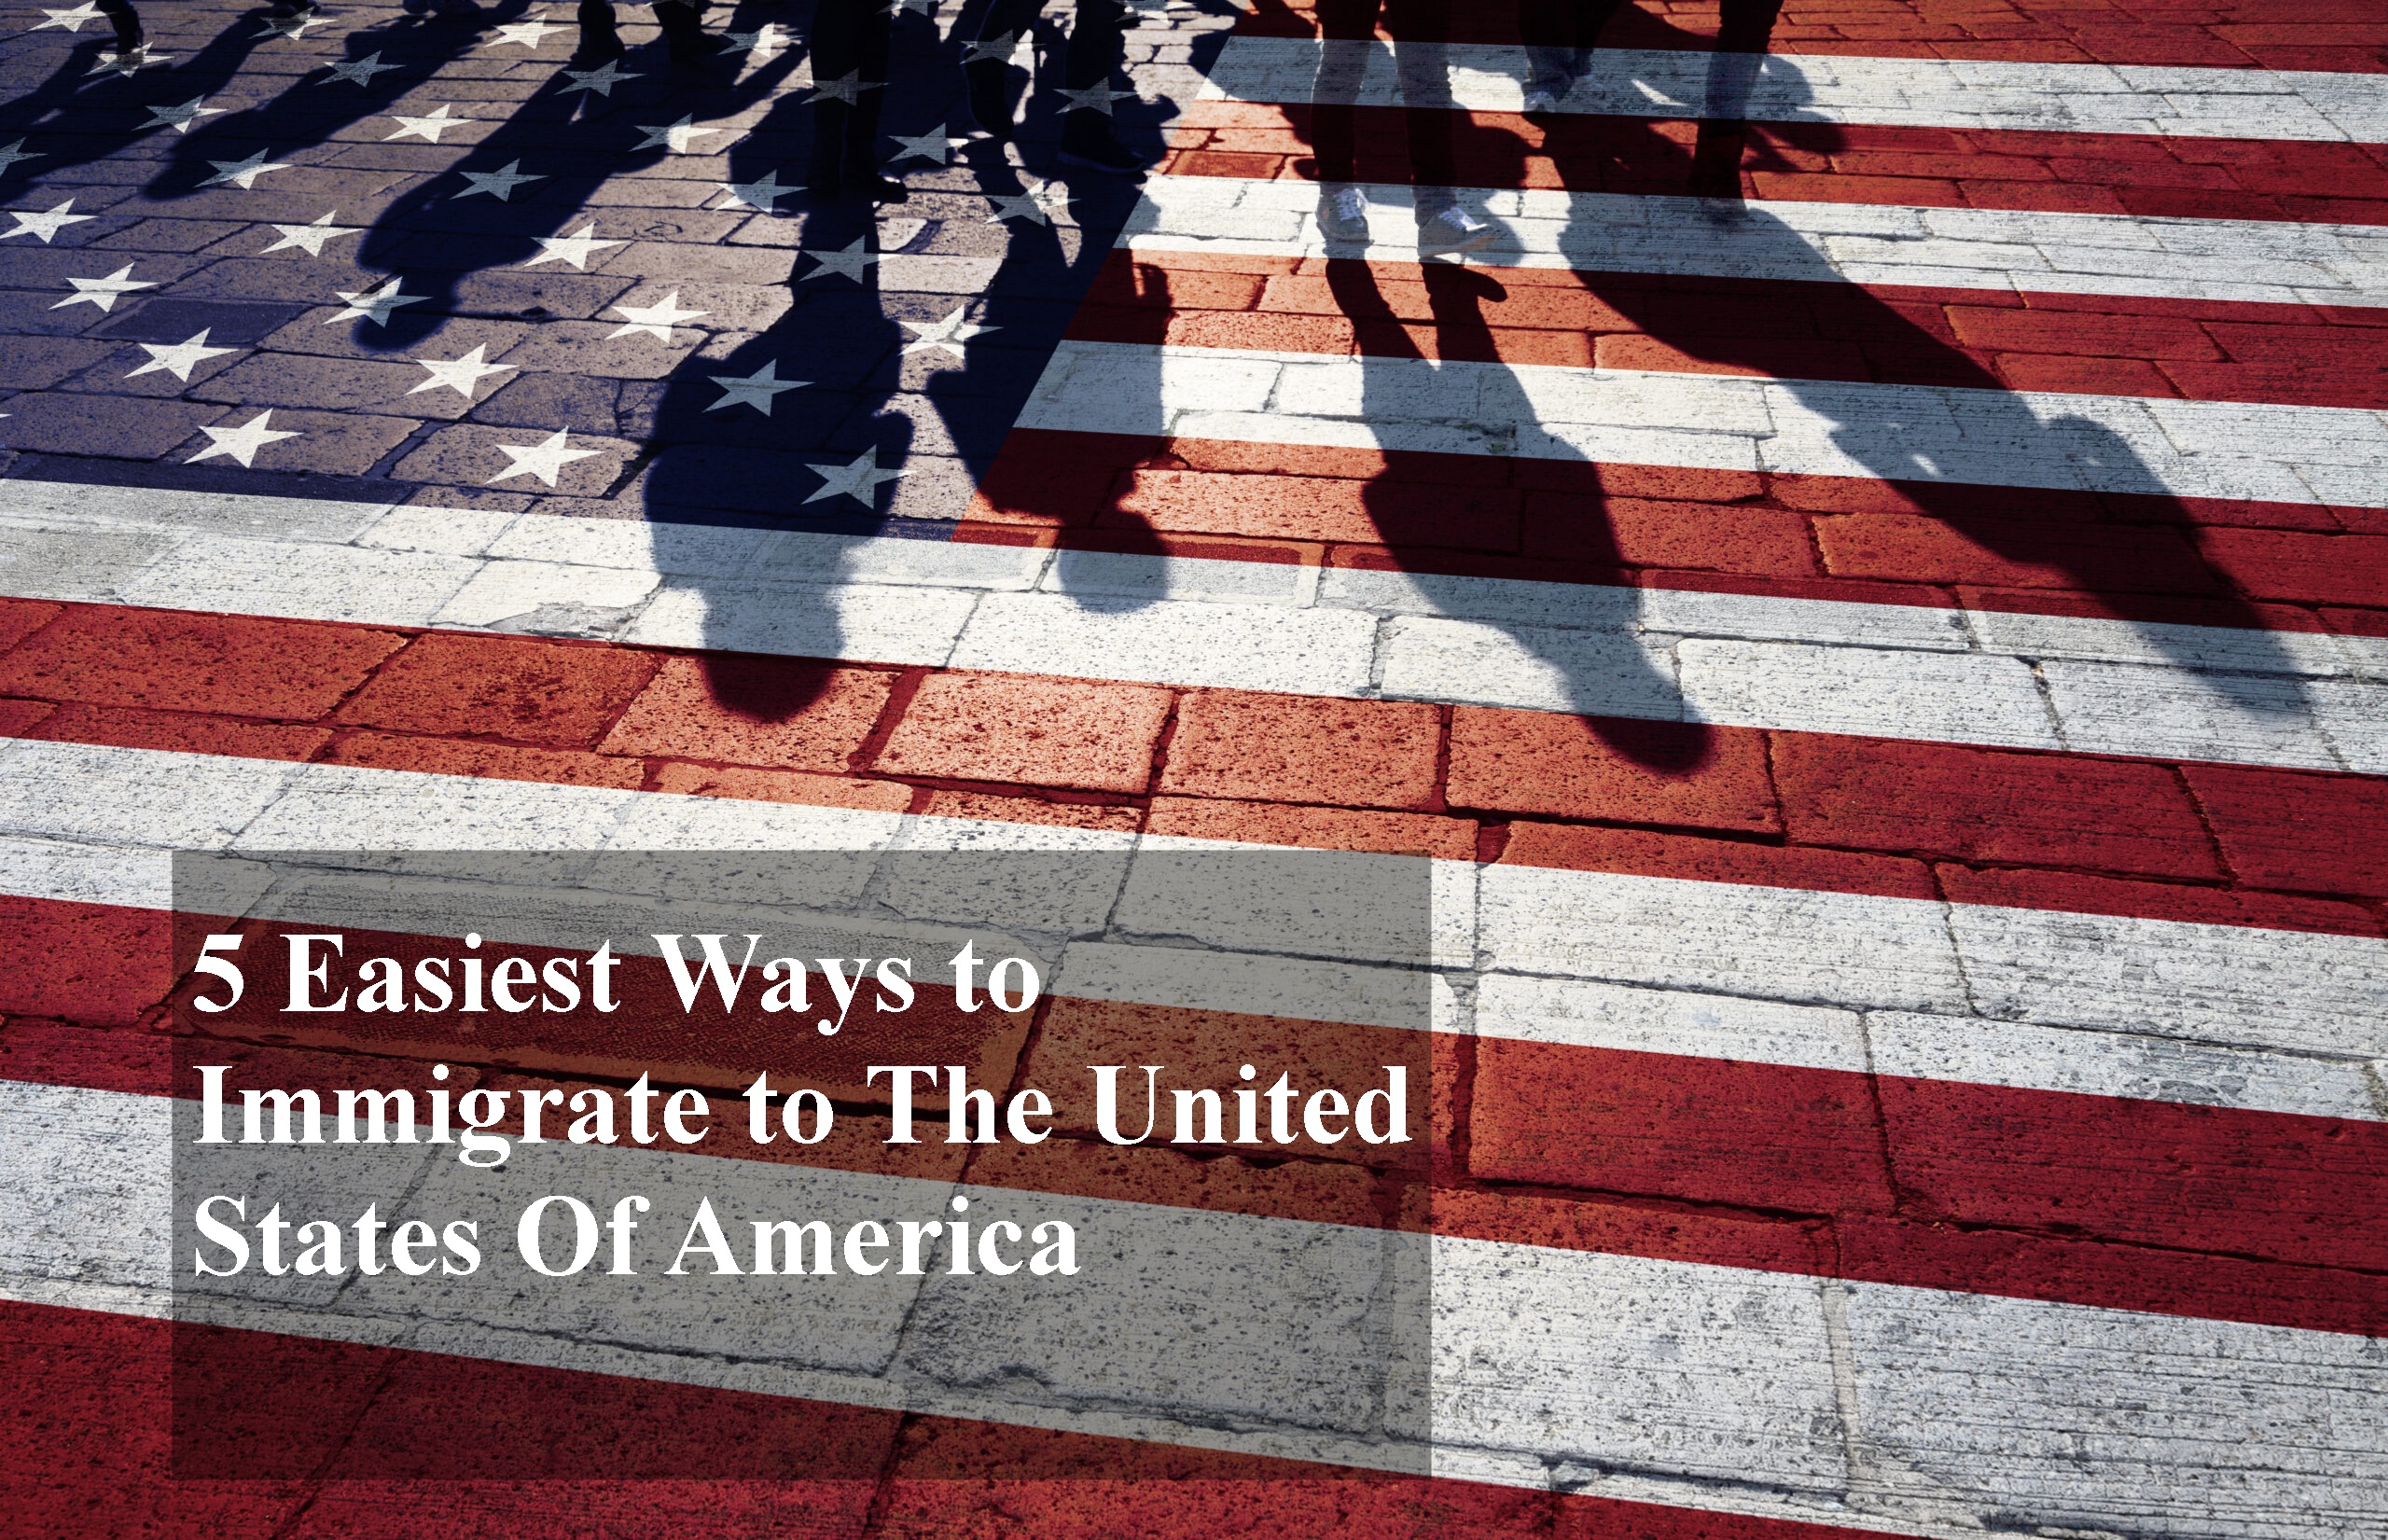 5 Easiest Ways To Immigrate To The United States Of America